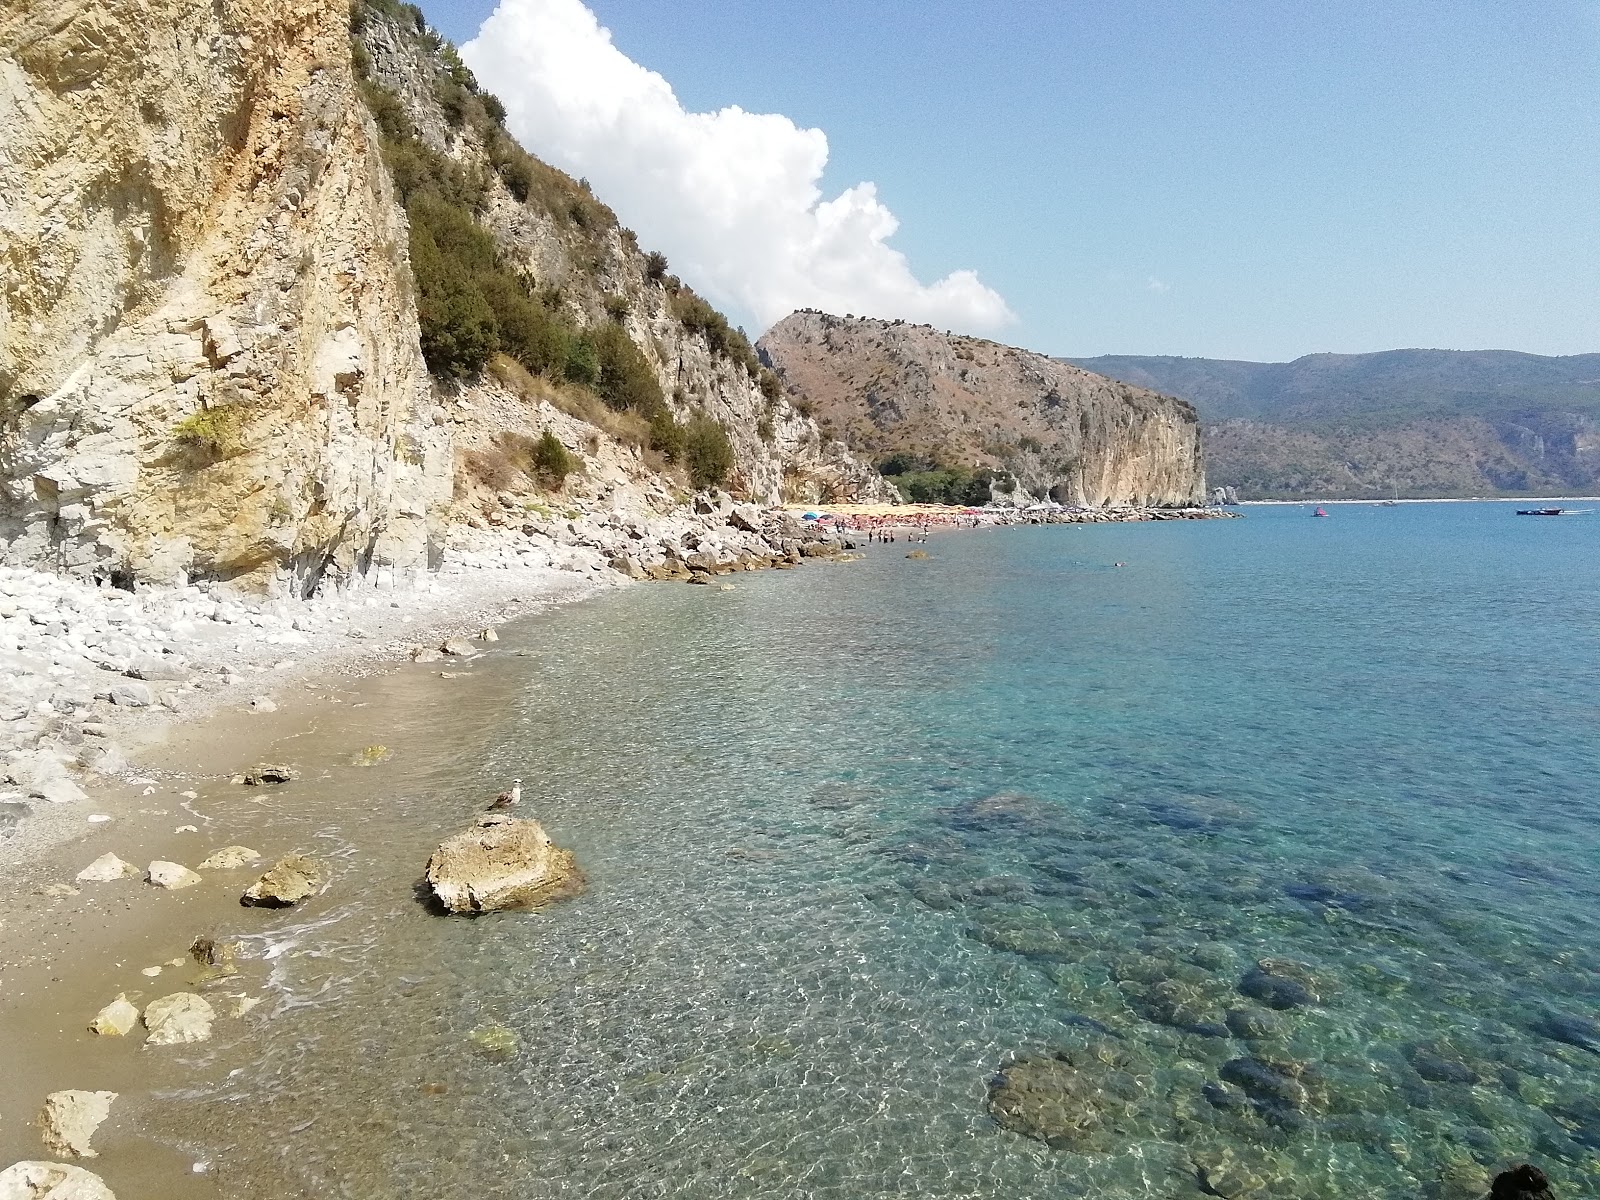 Photo of Spiaggia Marinella surrounded by mountains